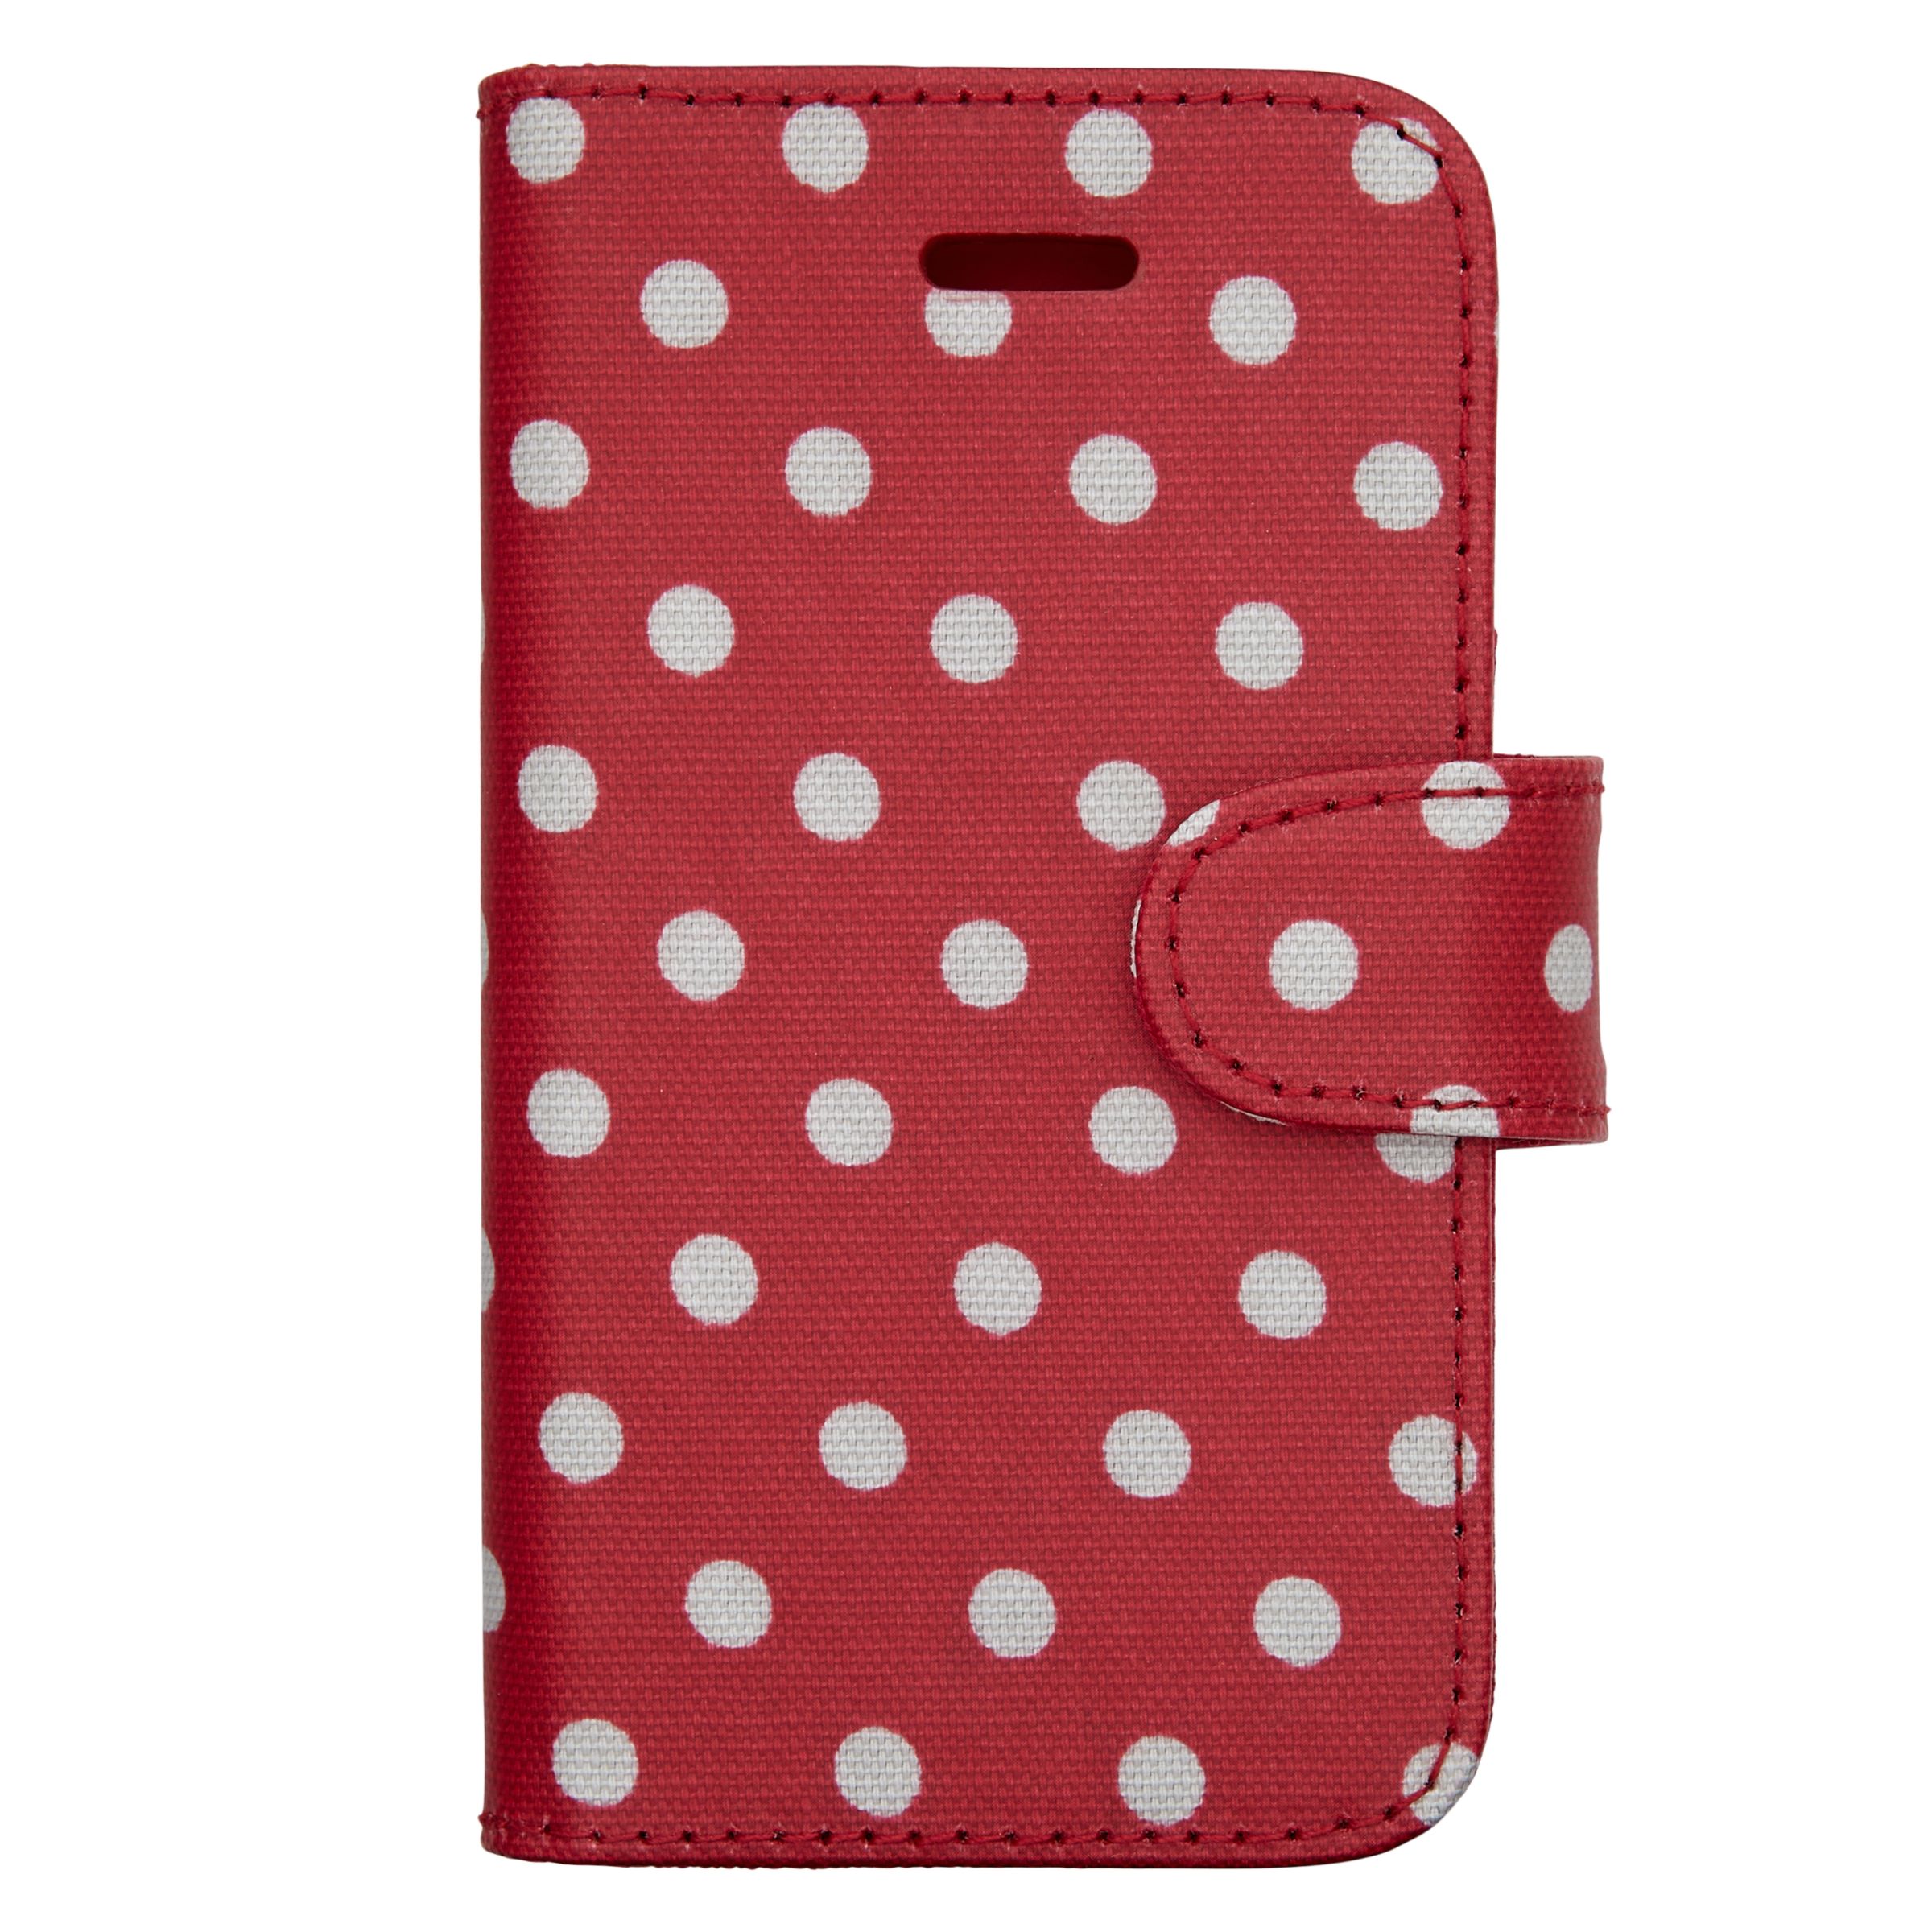 Cath Kidston Spotted Print iPhone 5 